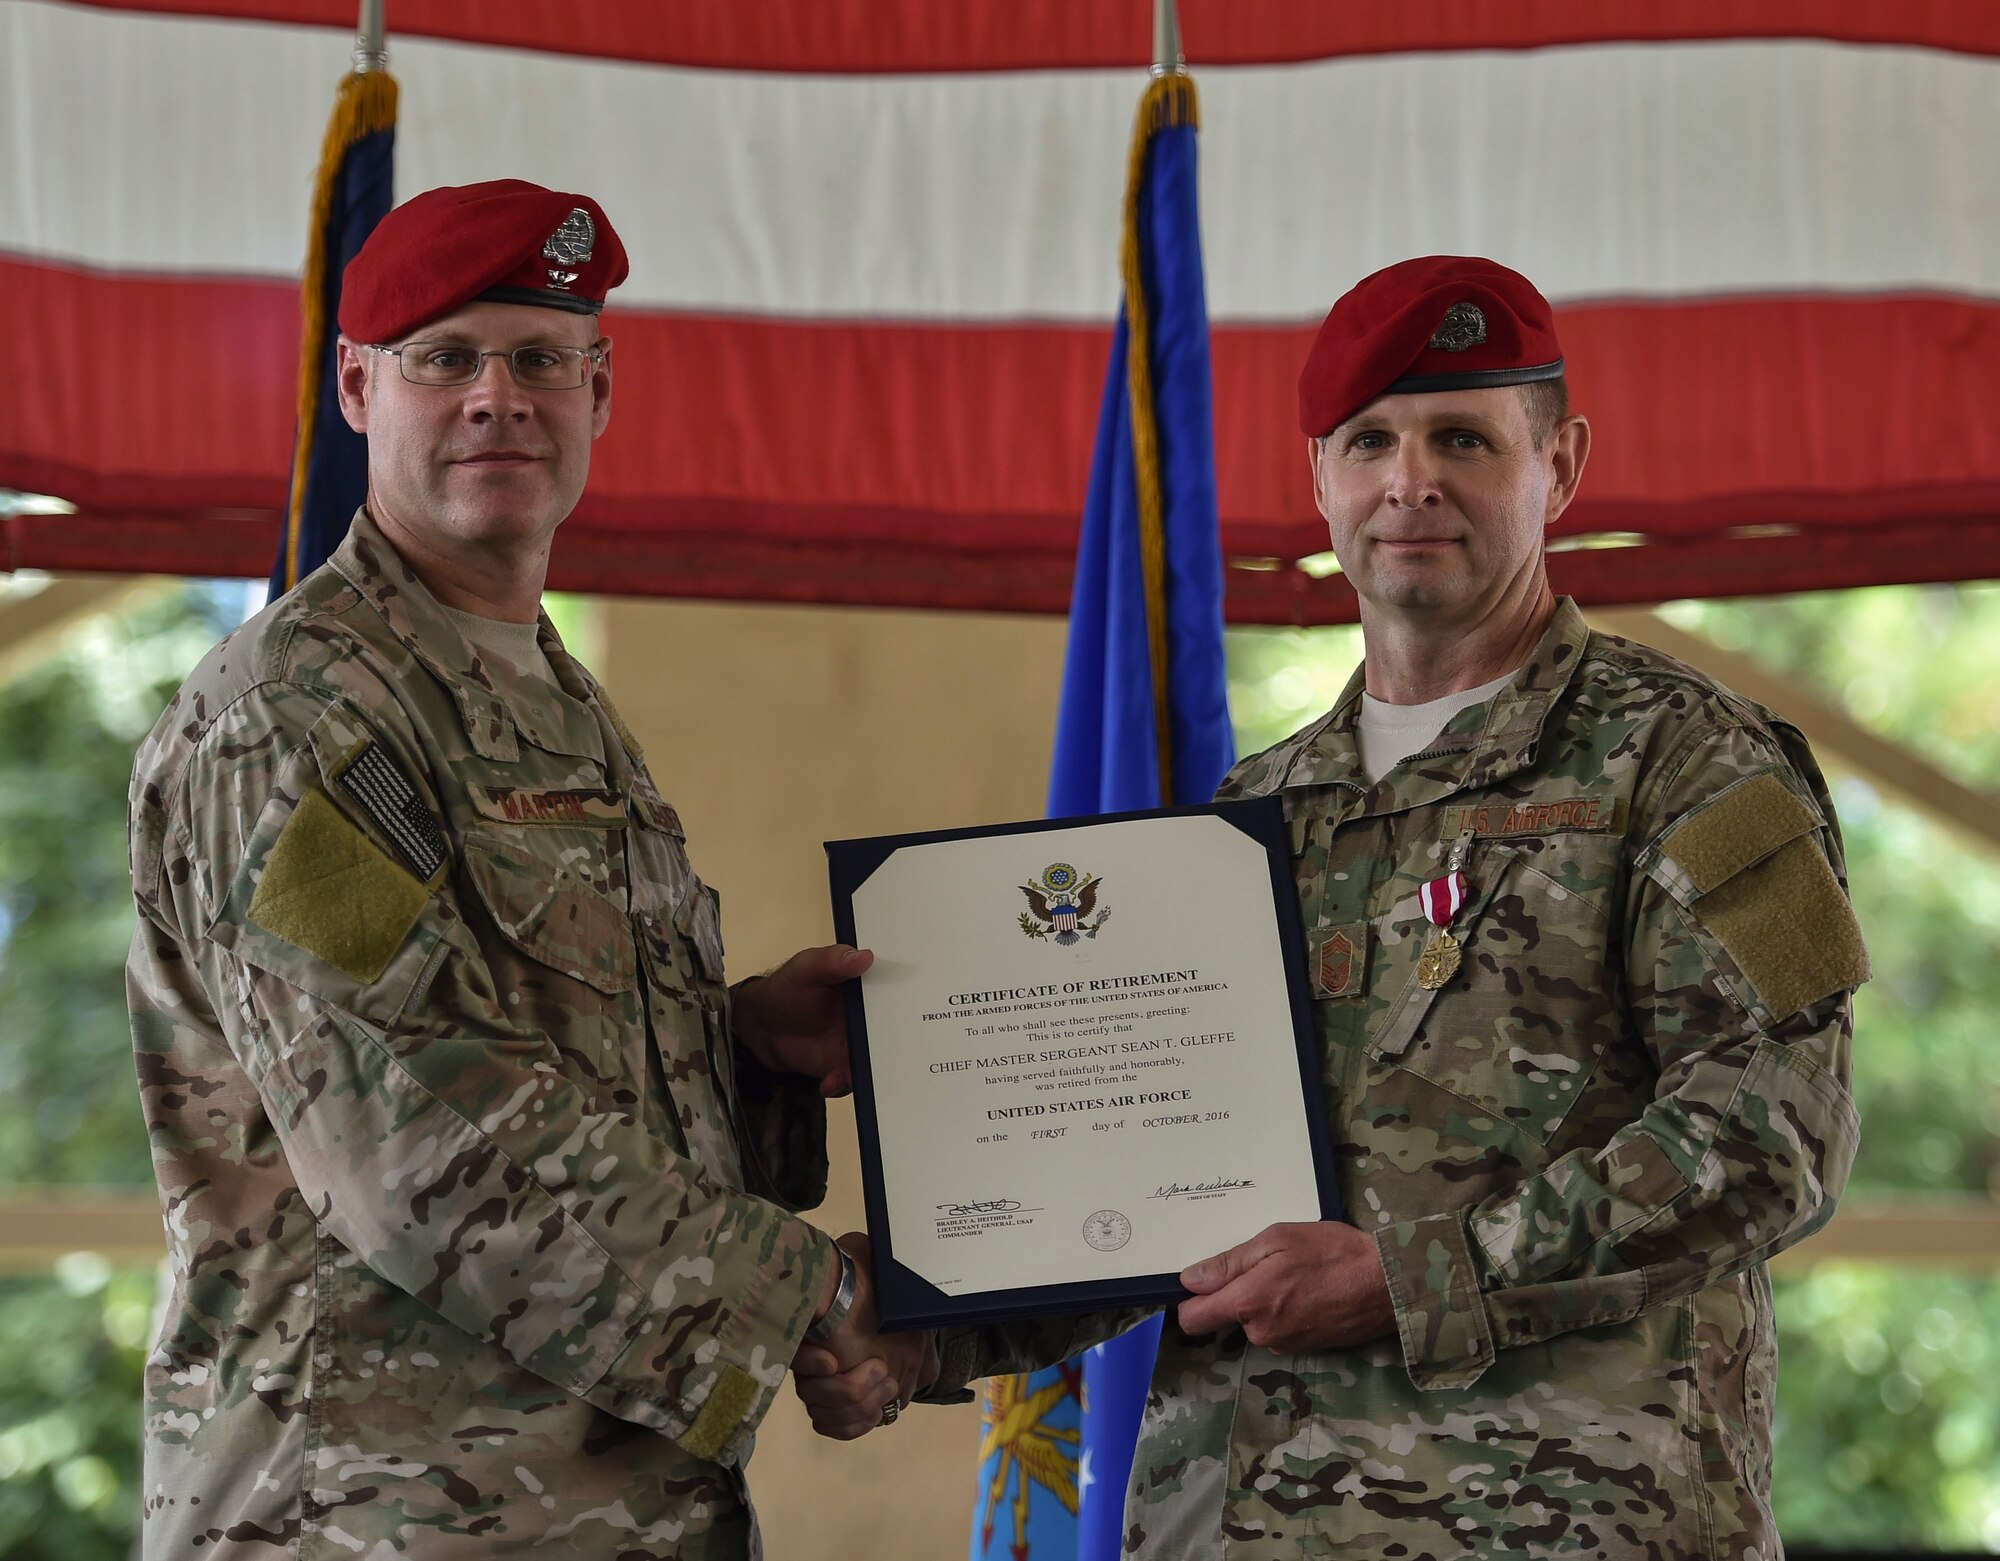 (From left) Col. Michael Martin, commander of the 24th Special Operations Wing, presents Chief Master Sgt. Sean Gleffe, combat control functional manager of Air Force Special Operations Command, a retirement certificate at Hurlburt Field, Fla., July 15, 2016. Gleffe retired following 30 years as a combat controller. Gleffe also served as the interim command chief of the 24th SOW. Throughout his Special Tactics career, Gleffe was certified a static line jump master, military freefall jump master and military dive supervisor. (U.S. Air Force photo by Senior Airman Ryan Conroy)